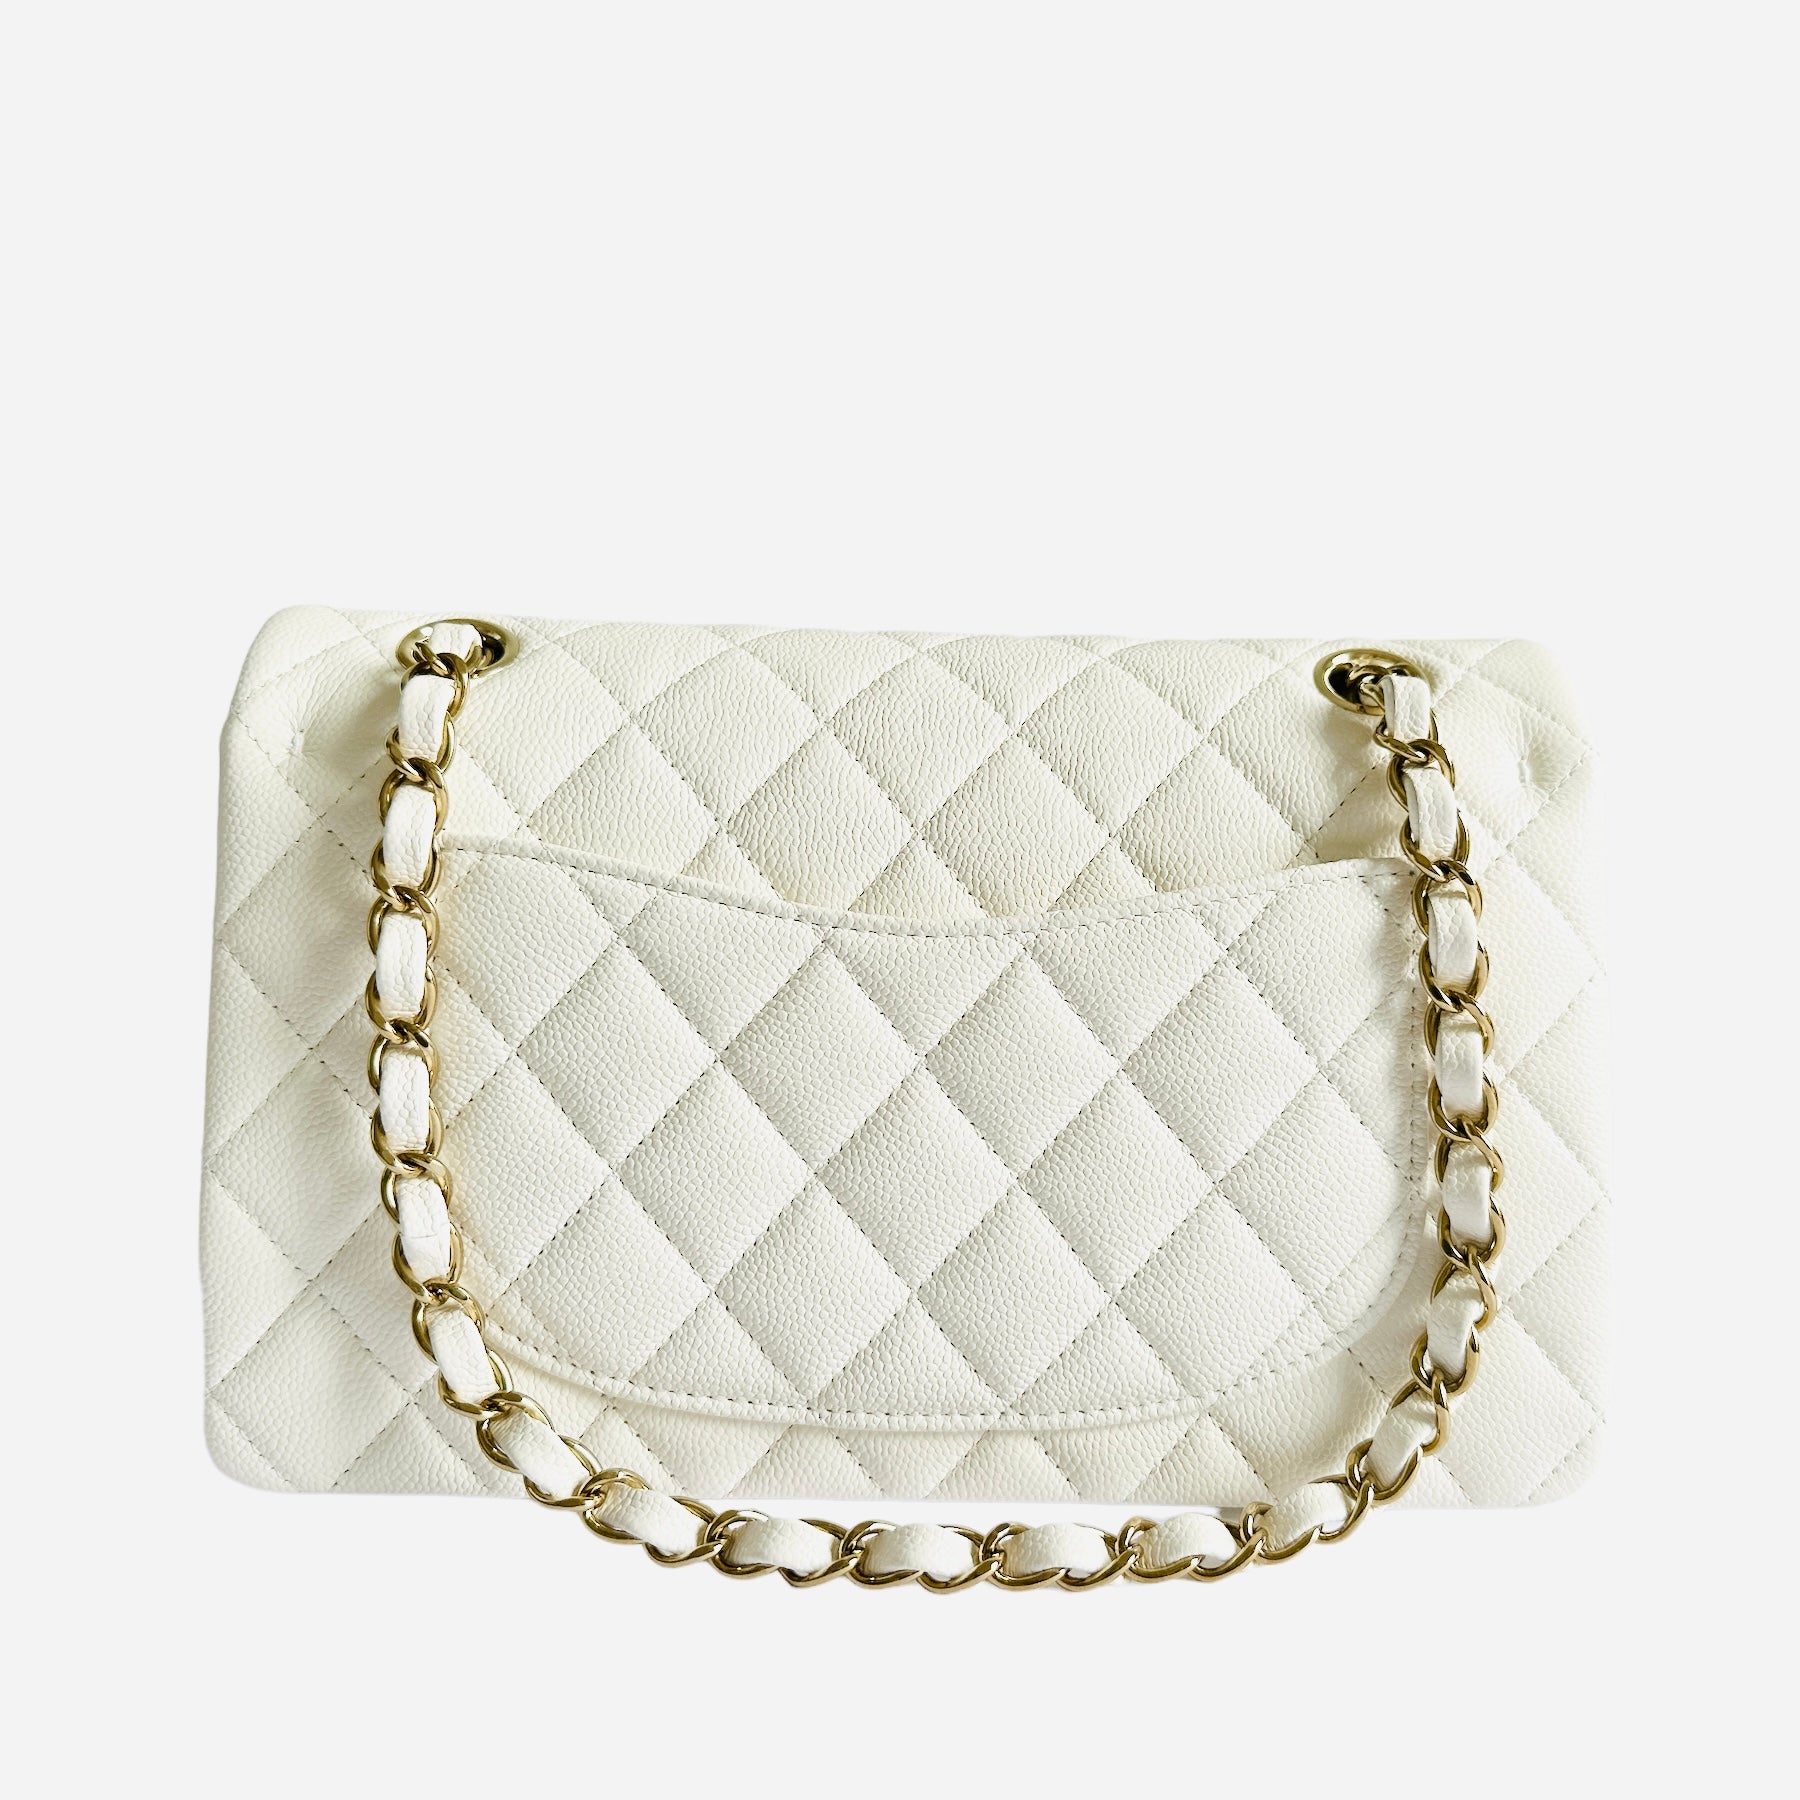 Chanel White Caviar Flap Bag - Small (NWT) – Lux Second Chance